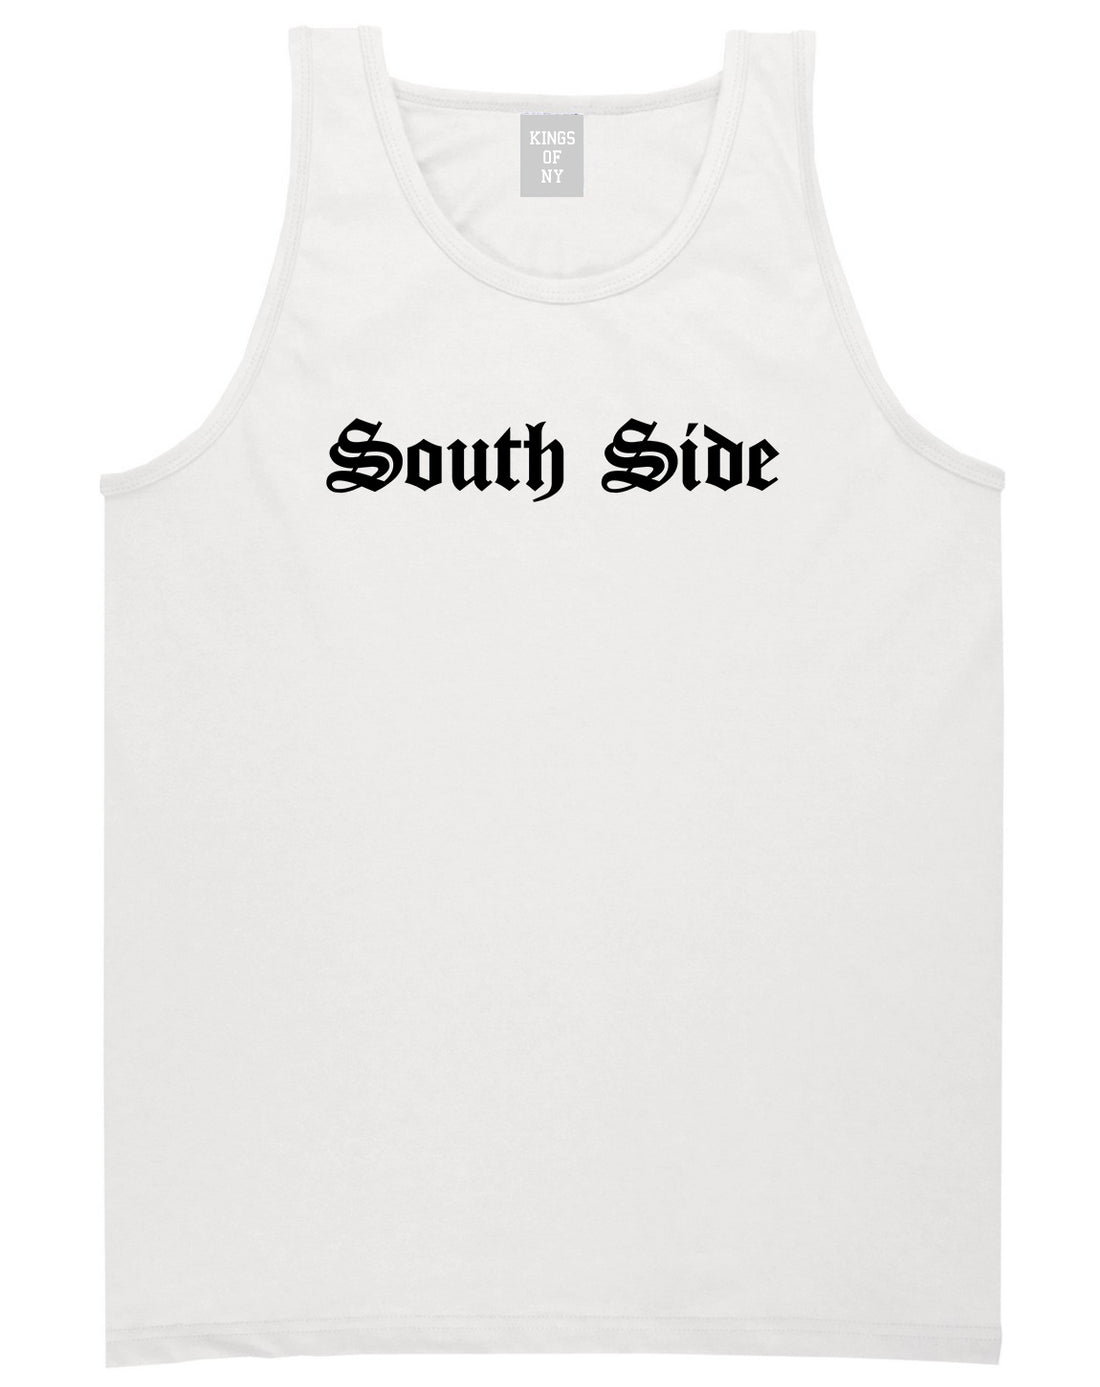 South Side Old English Mens Tank Top T-Shirt White